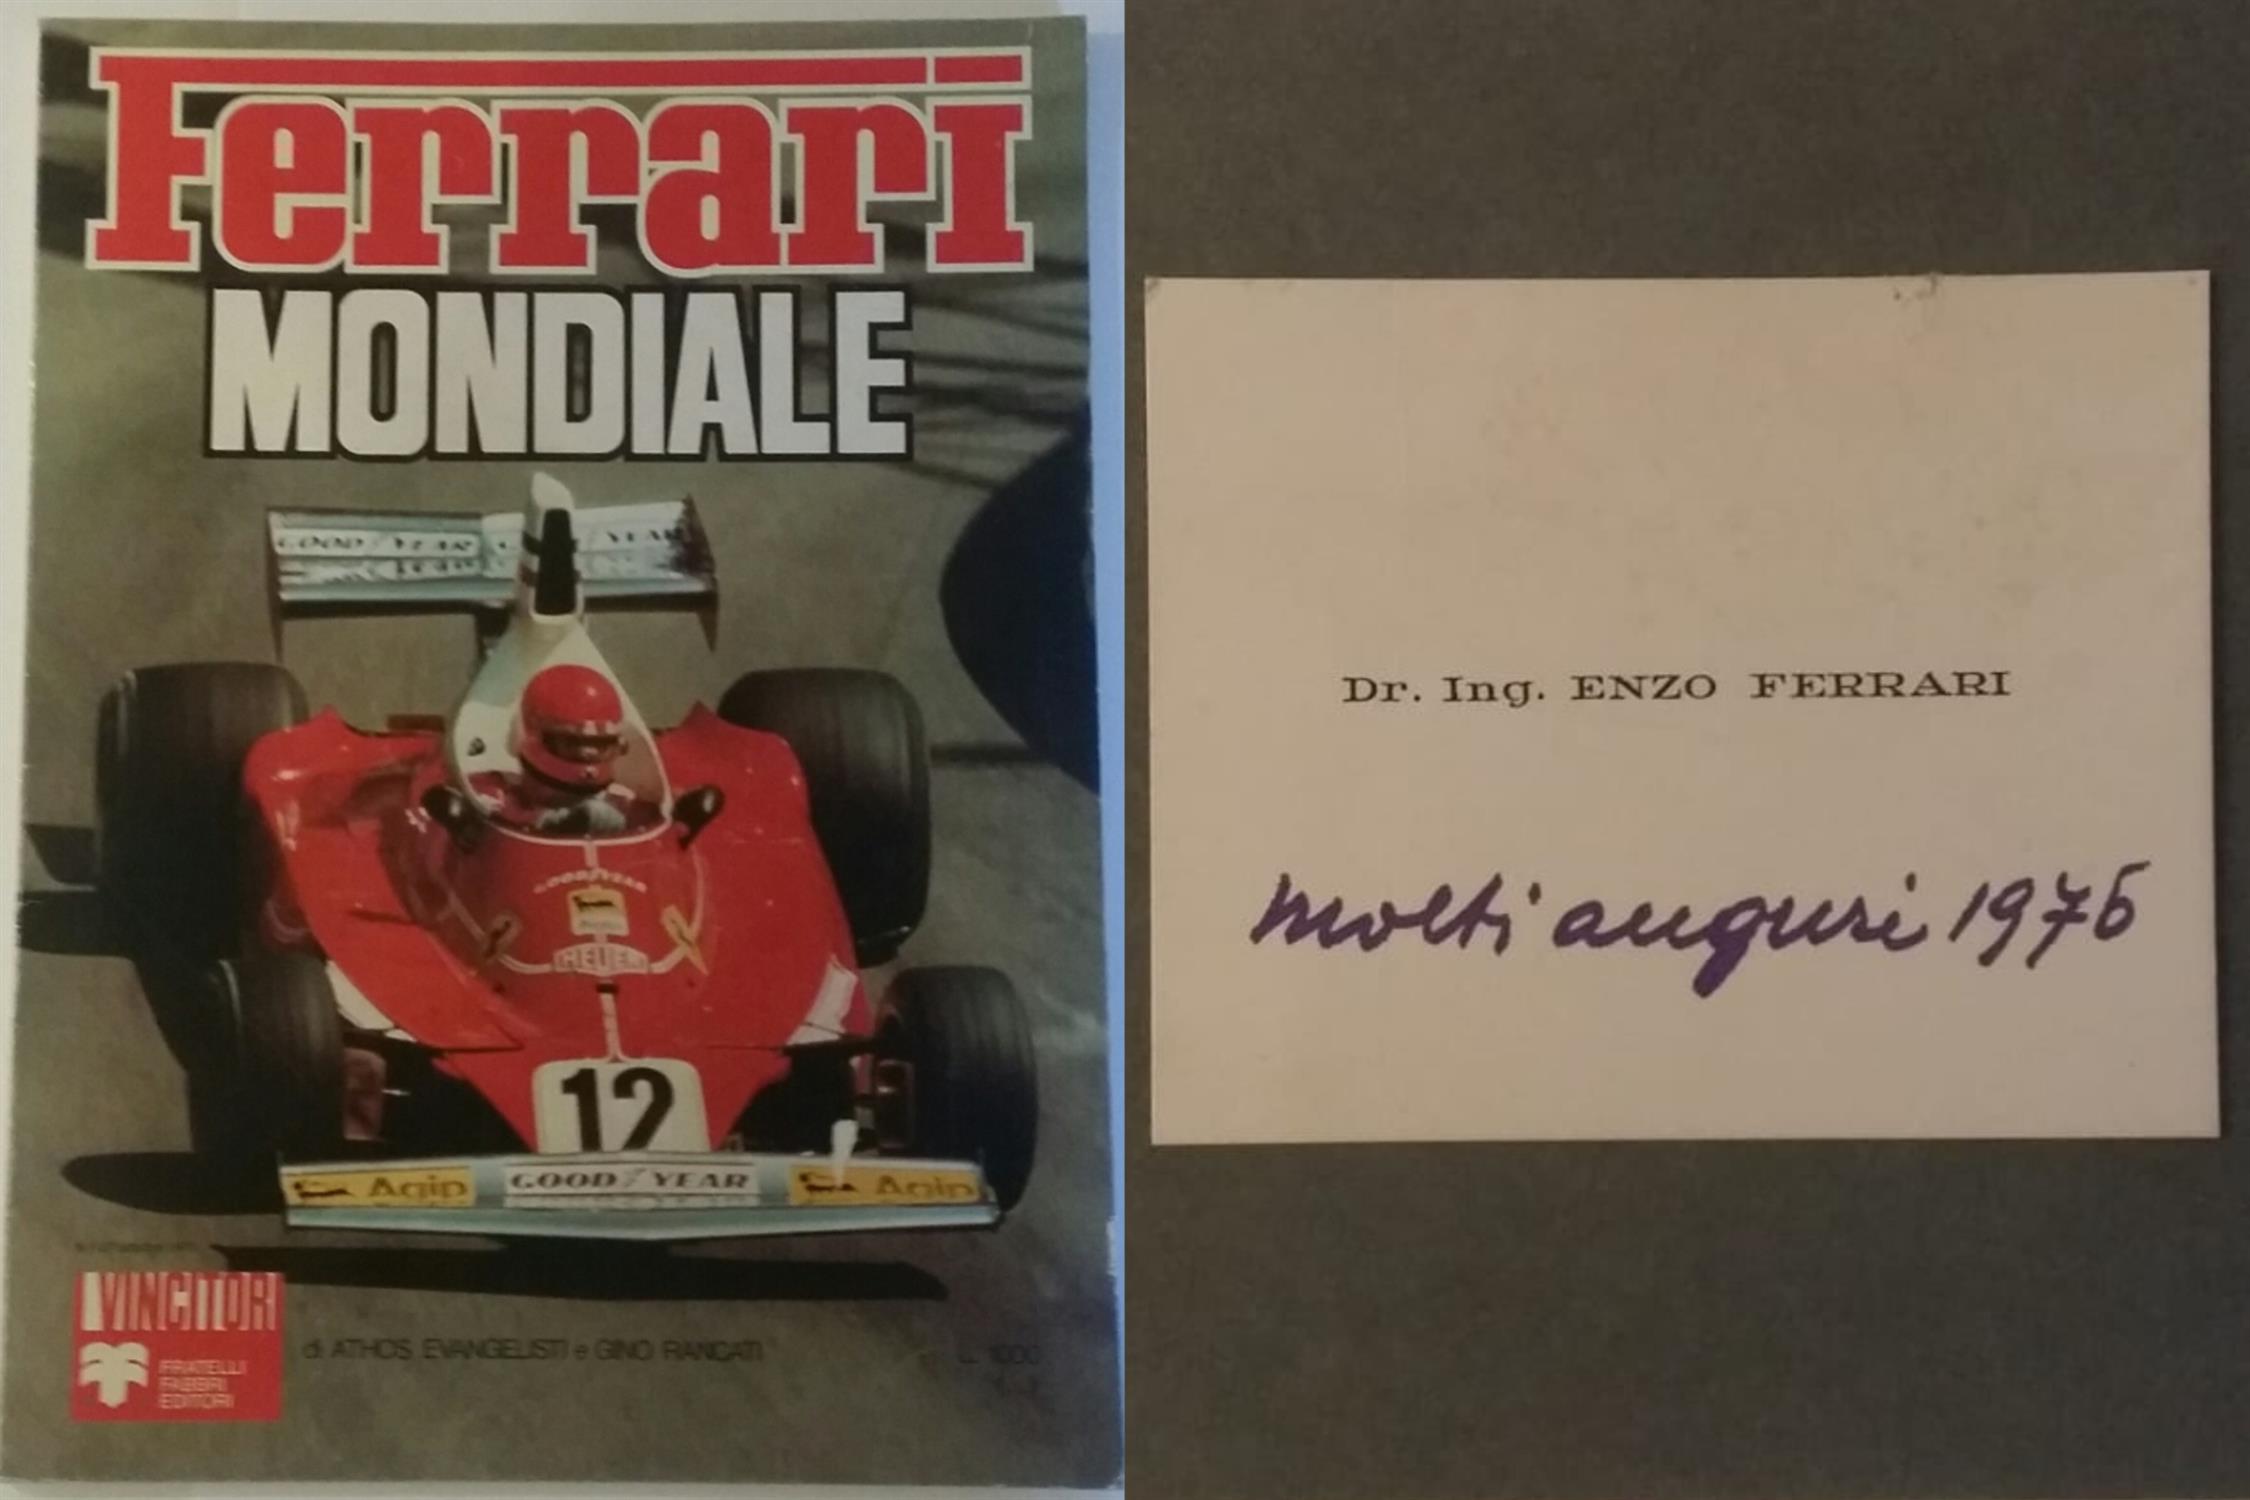 1976 Ferrari Mondiale Official Yearbook with Enzo Ferrari-Signed Business Card